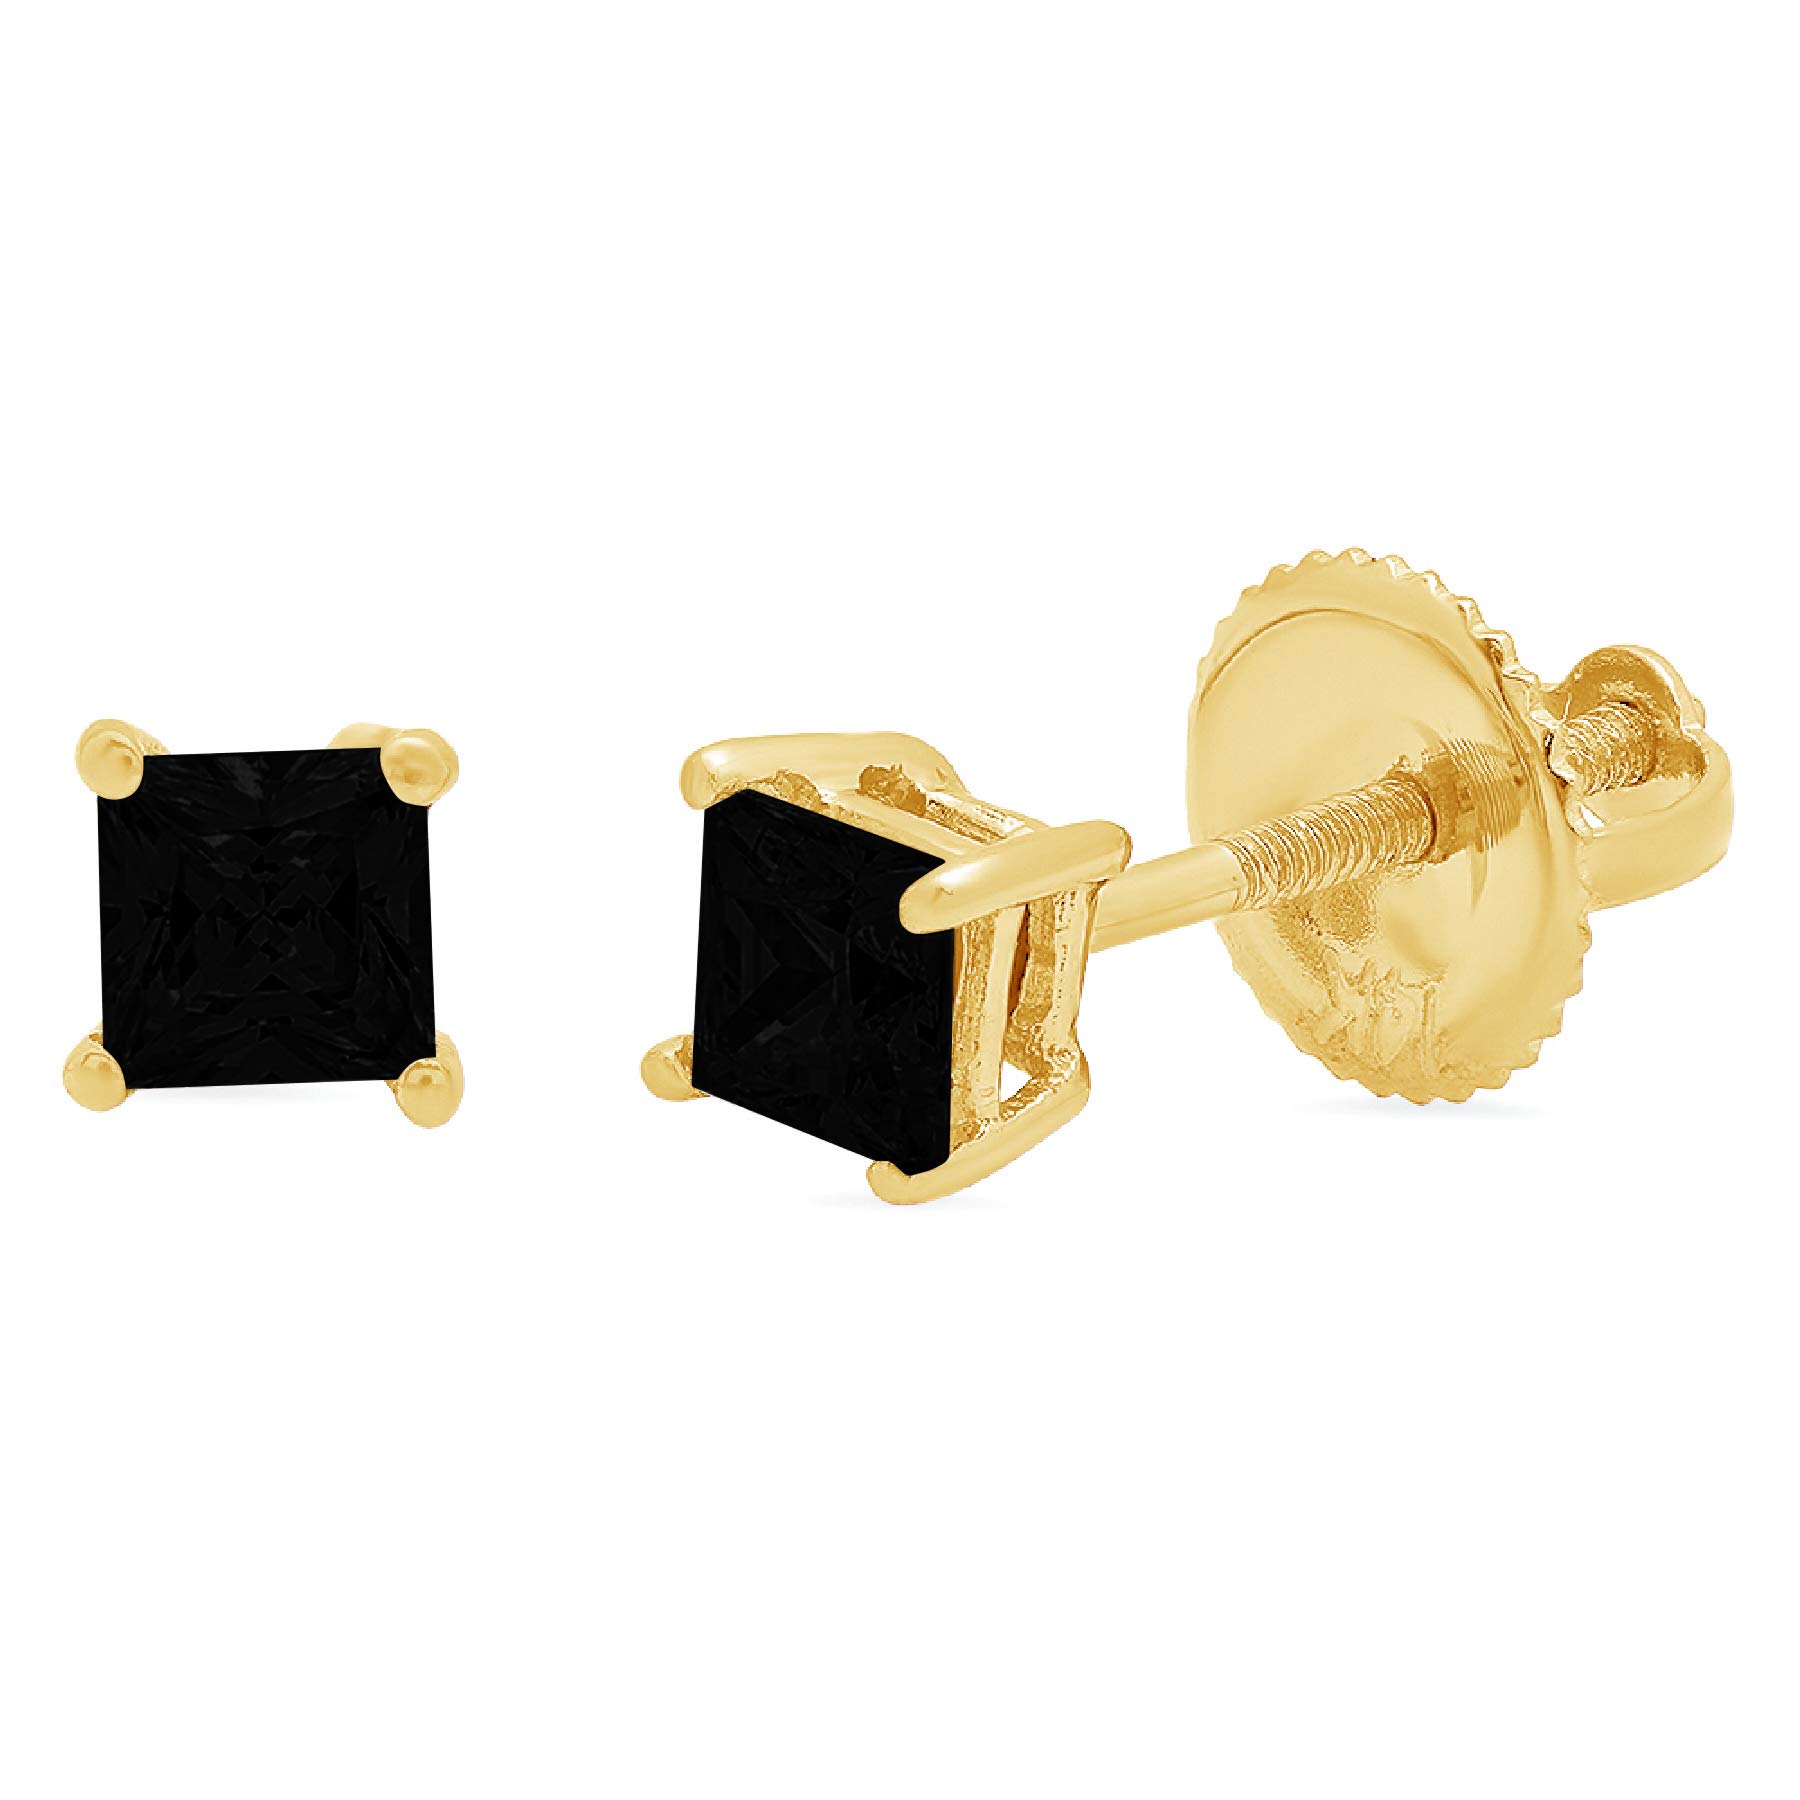 0.4ct Brilliant Princess Cut Solitaire Flawless Genuine Natural Black Onyx Gemstone Unisex Pair of Stud Designer Earrings Solid 14k Yellow Gold Screw Back conflict free Jewelry